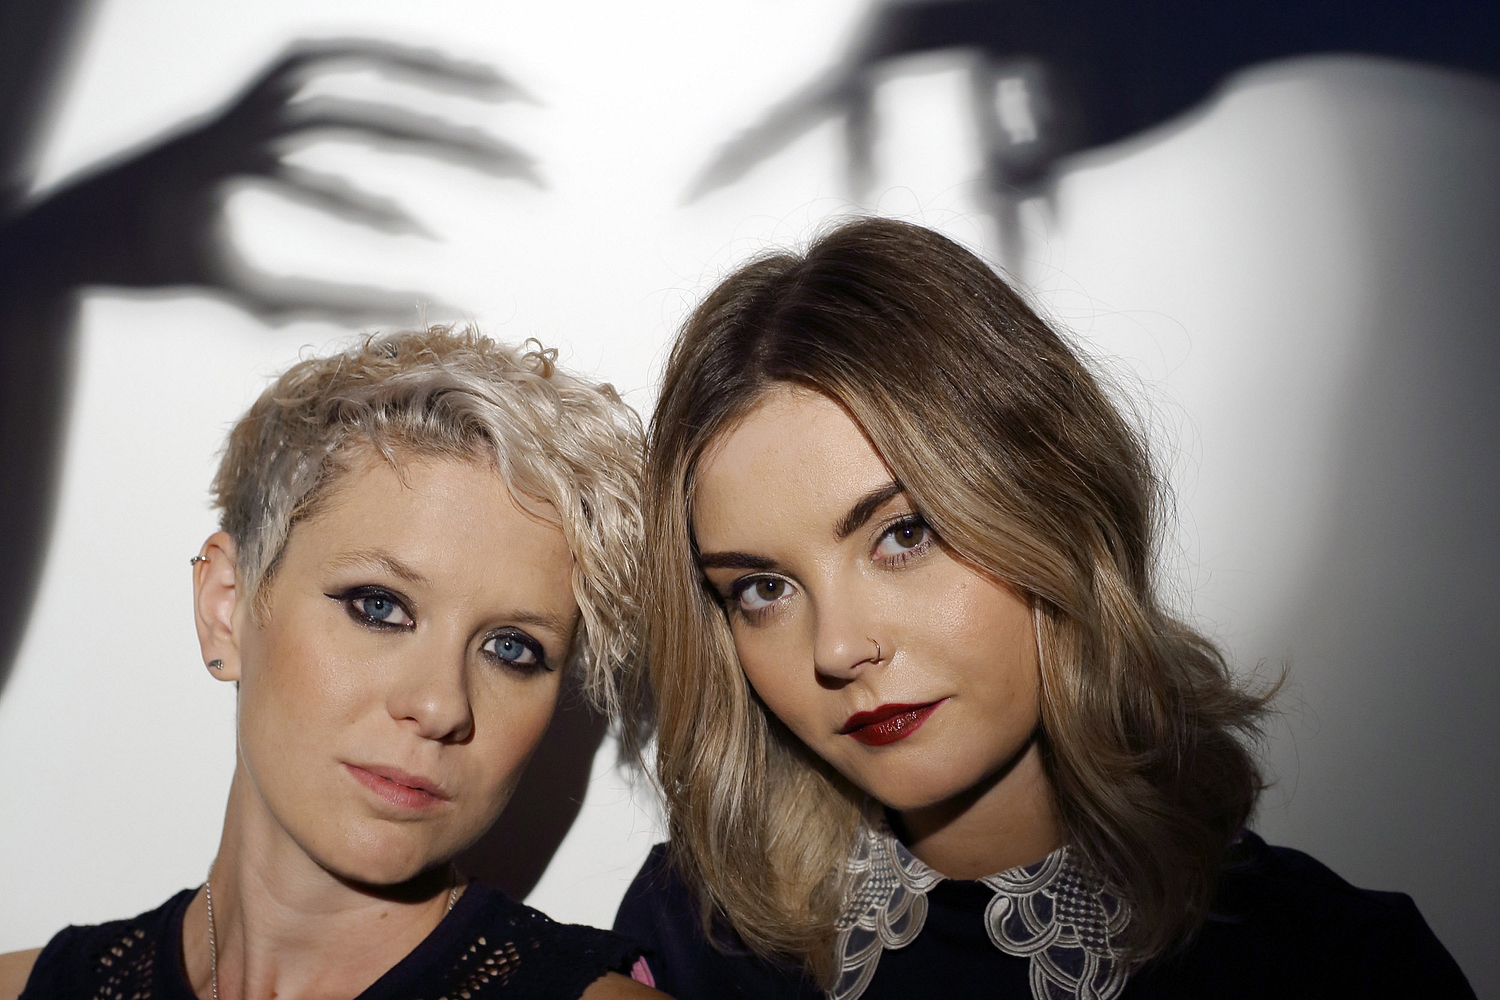 Honeyblood: Ready for the magic